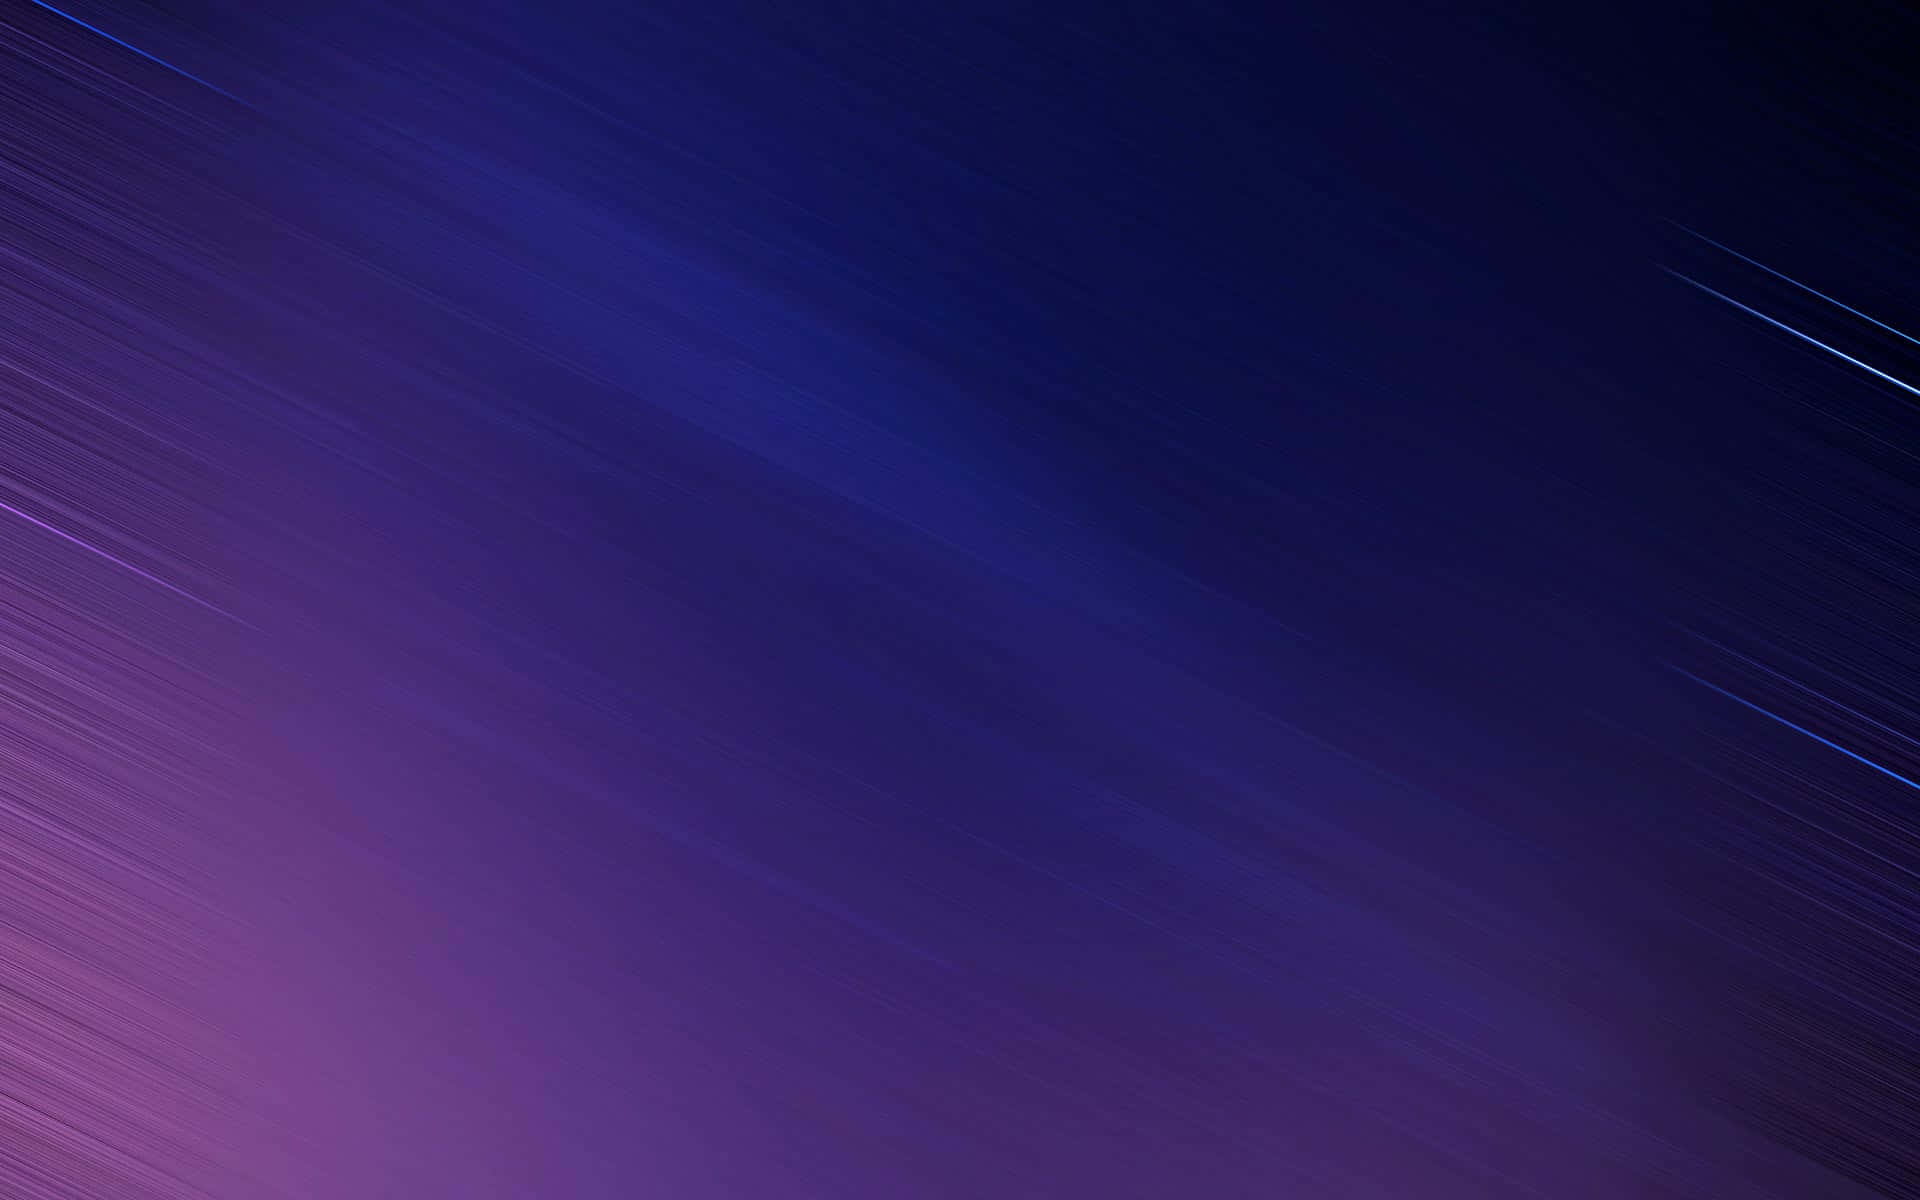 A Purple And Blue Background With A Blue And Purple Line